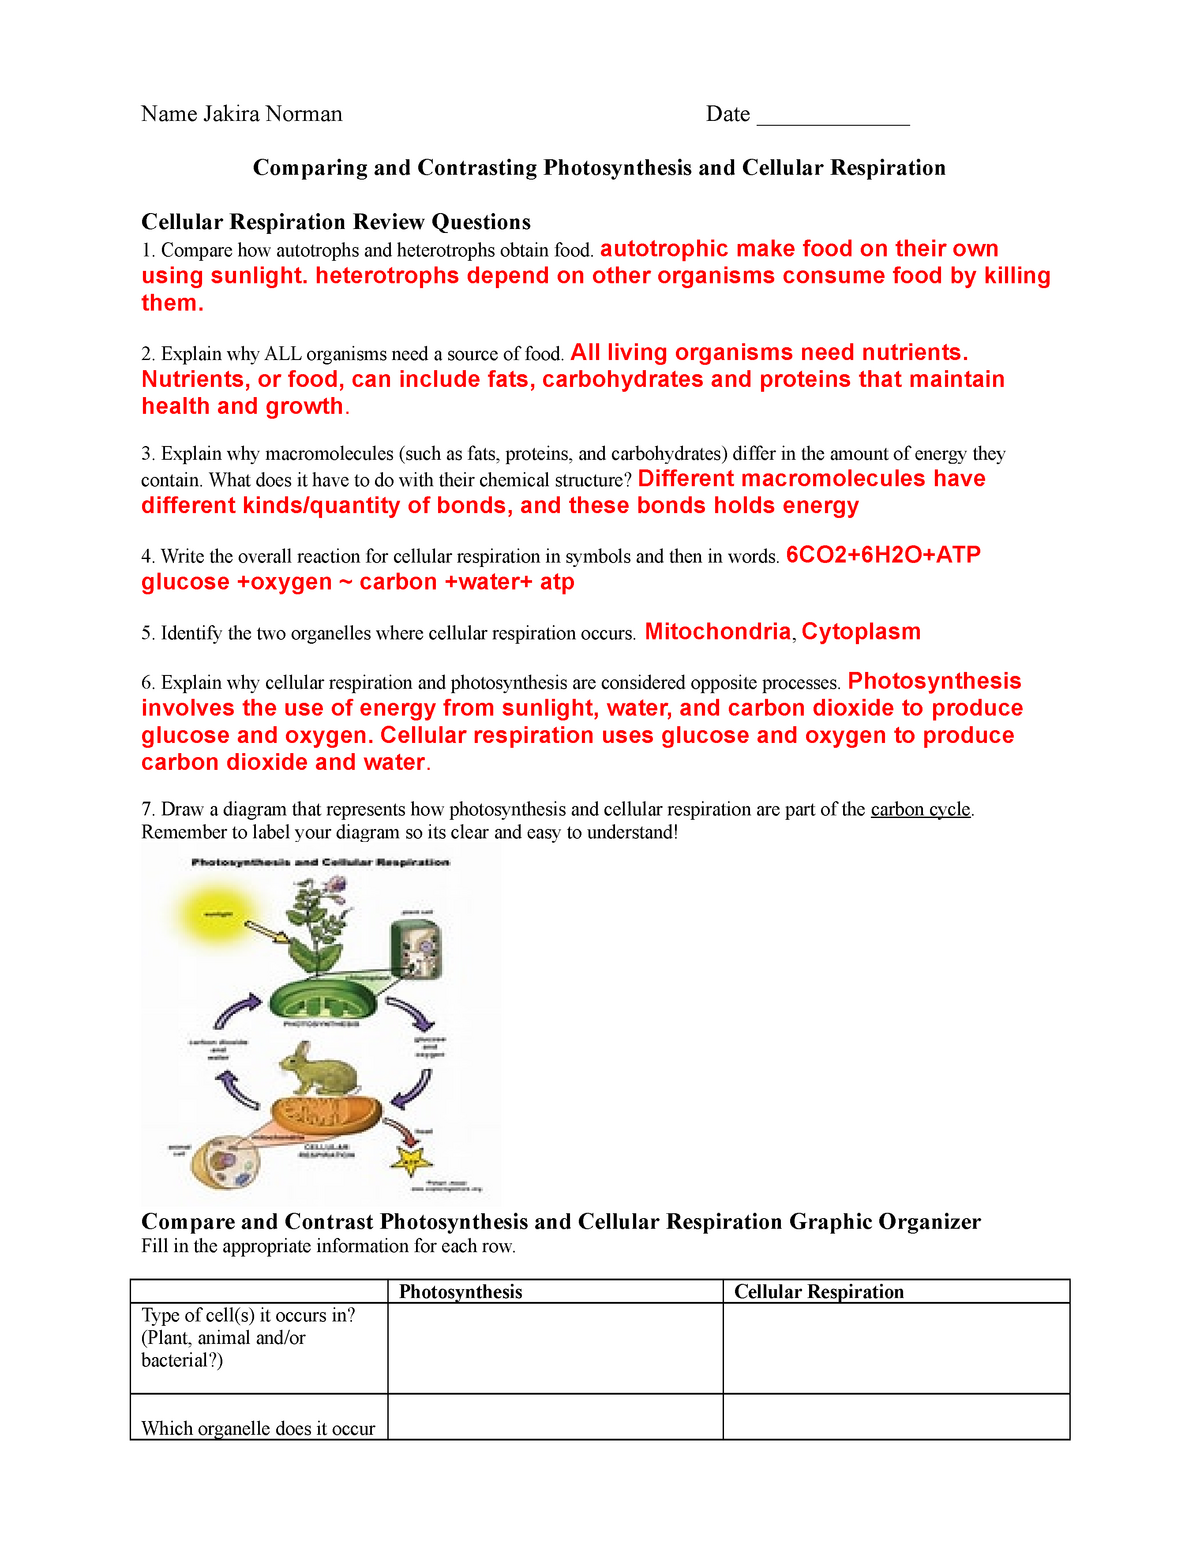 photosynthesis and cellular respiration compare and contrast essay